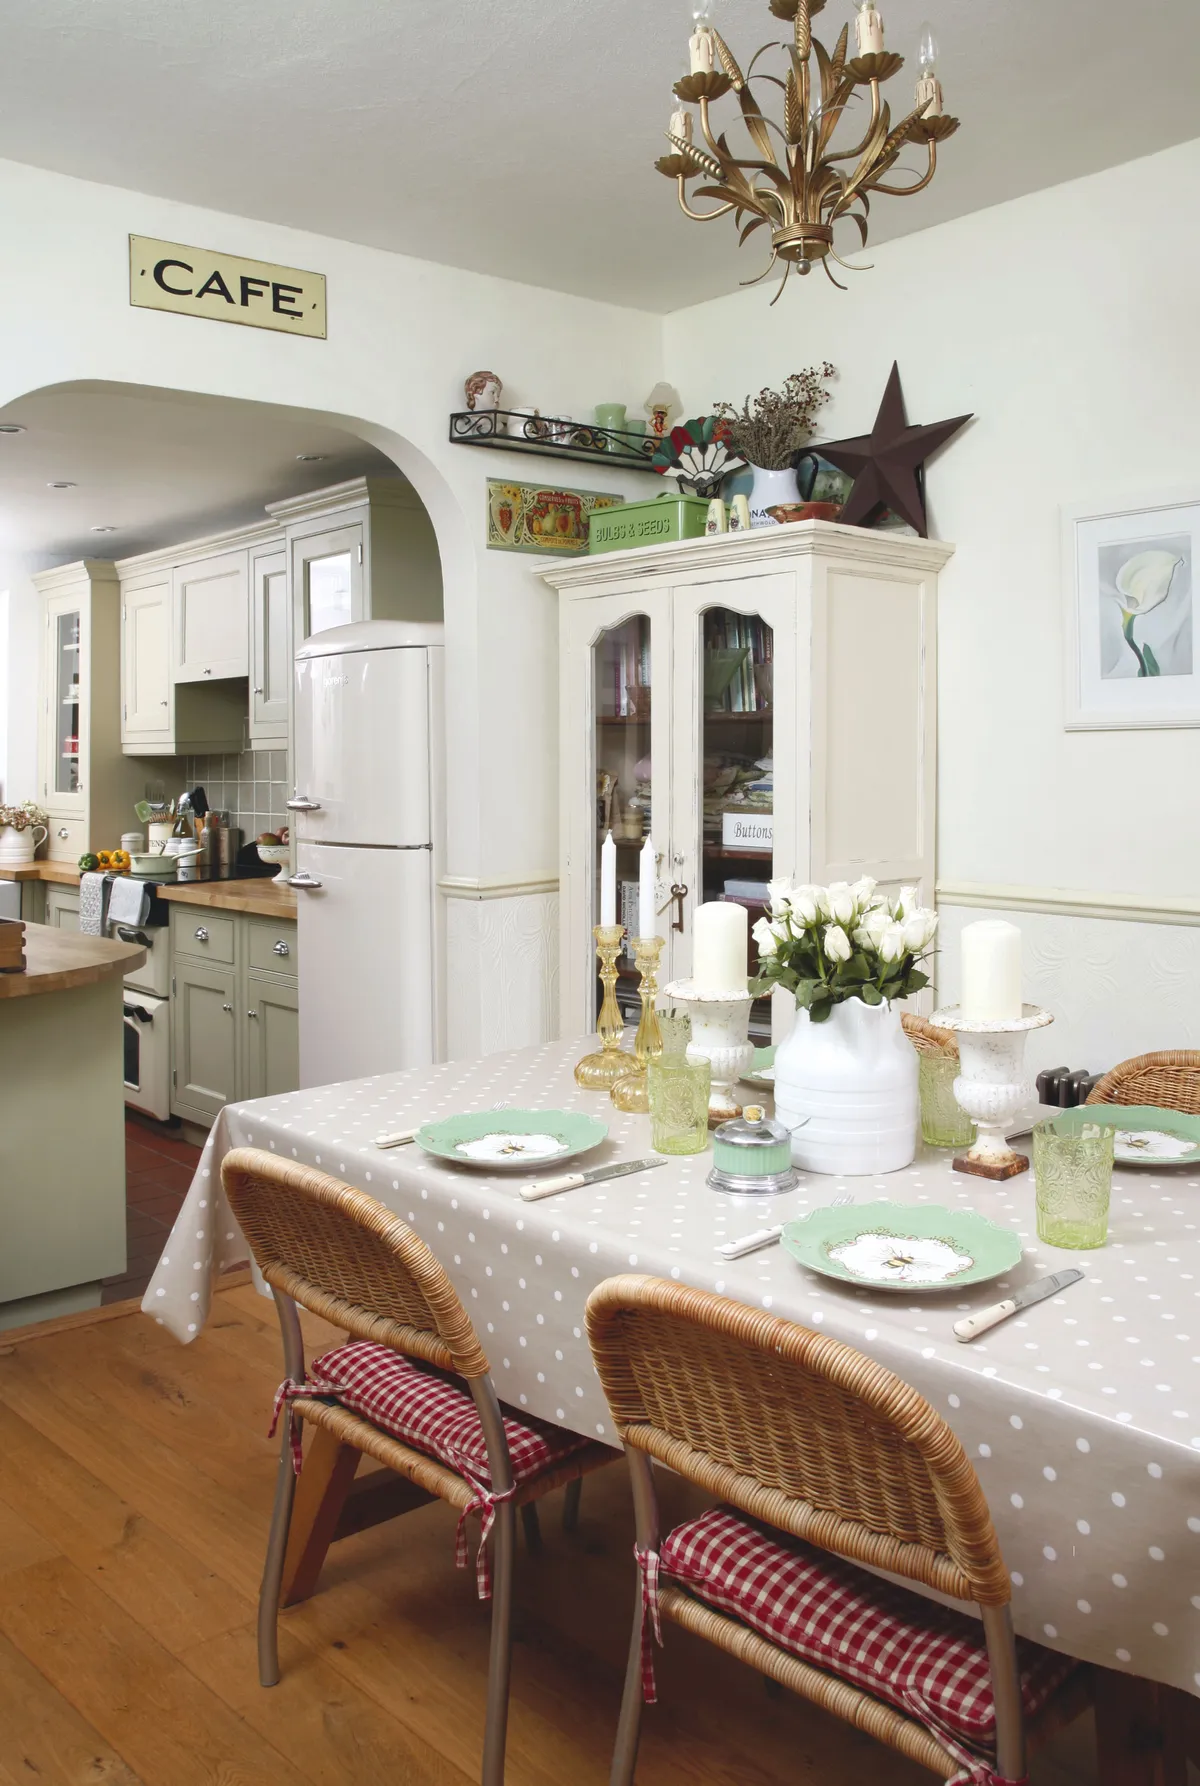 Louise has continued her pastel green and cream cottage theme into the dining room to create an airy interior with a sense of space